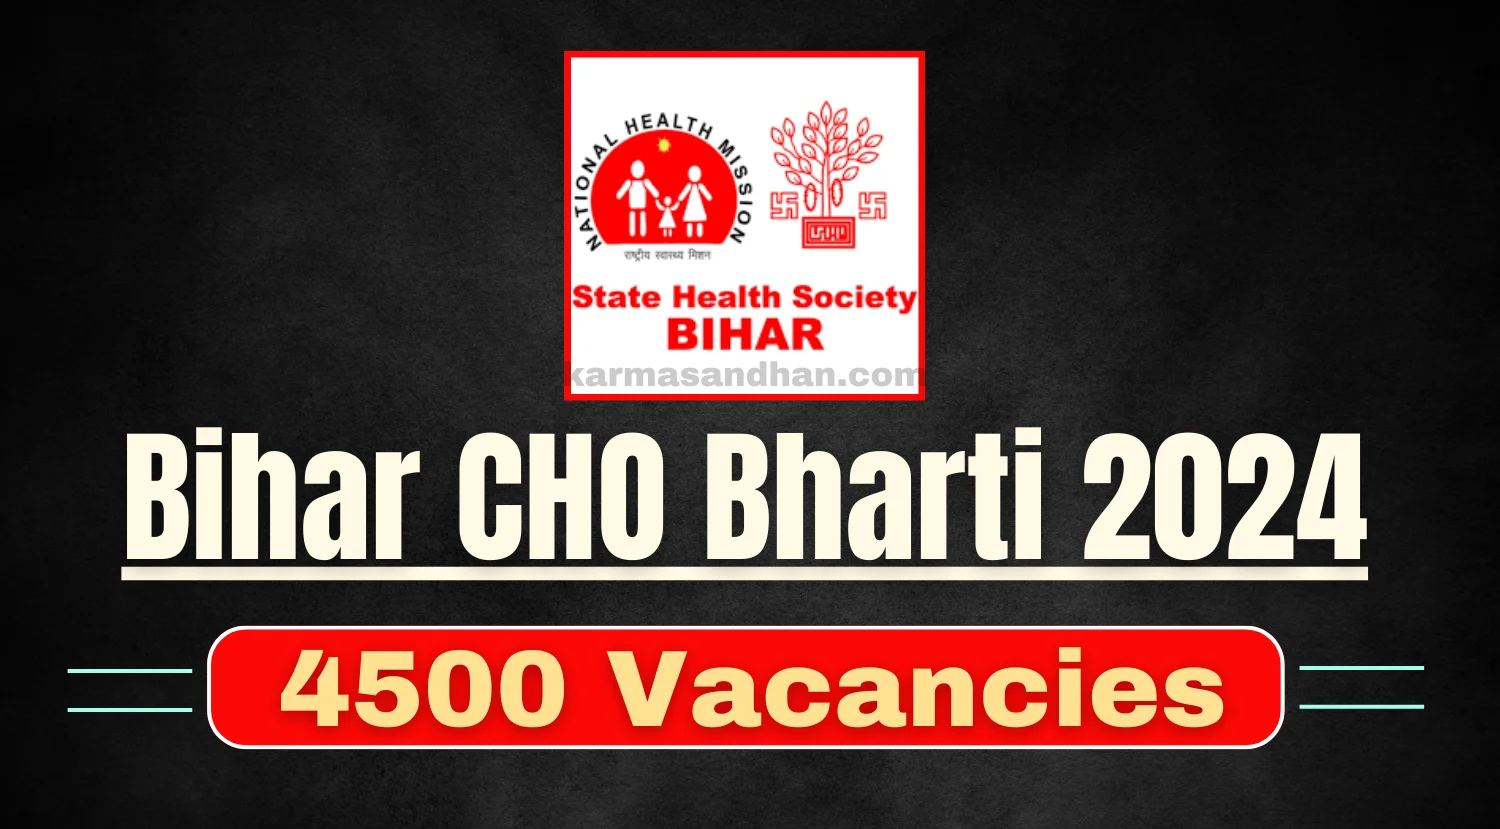 Bihar CHO Bharti 2024 Notification for 4500 Vacancies Out by SHSB